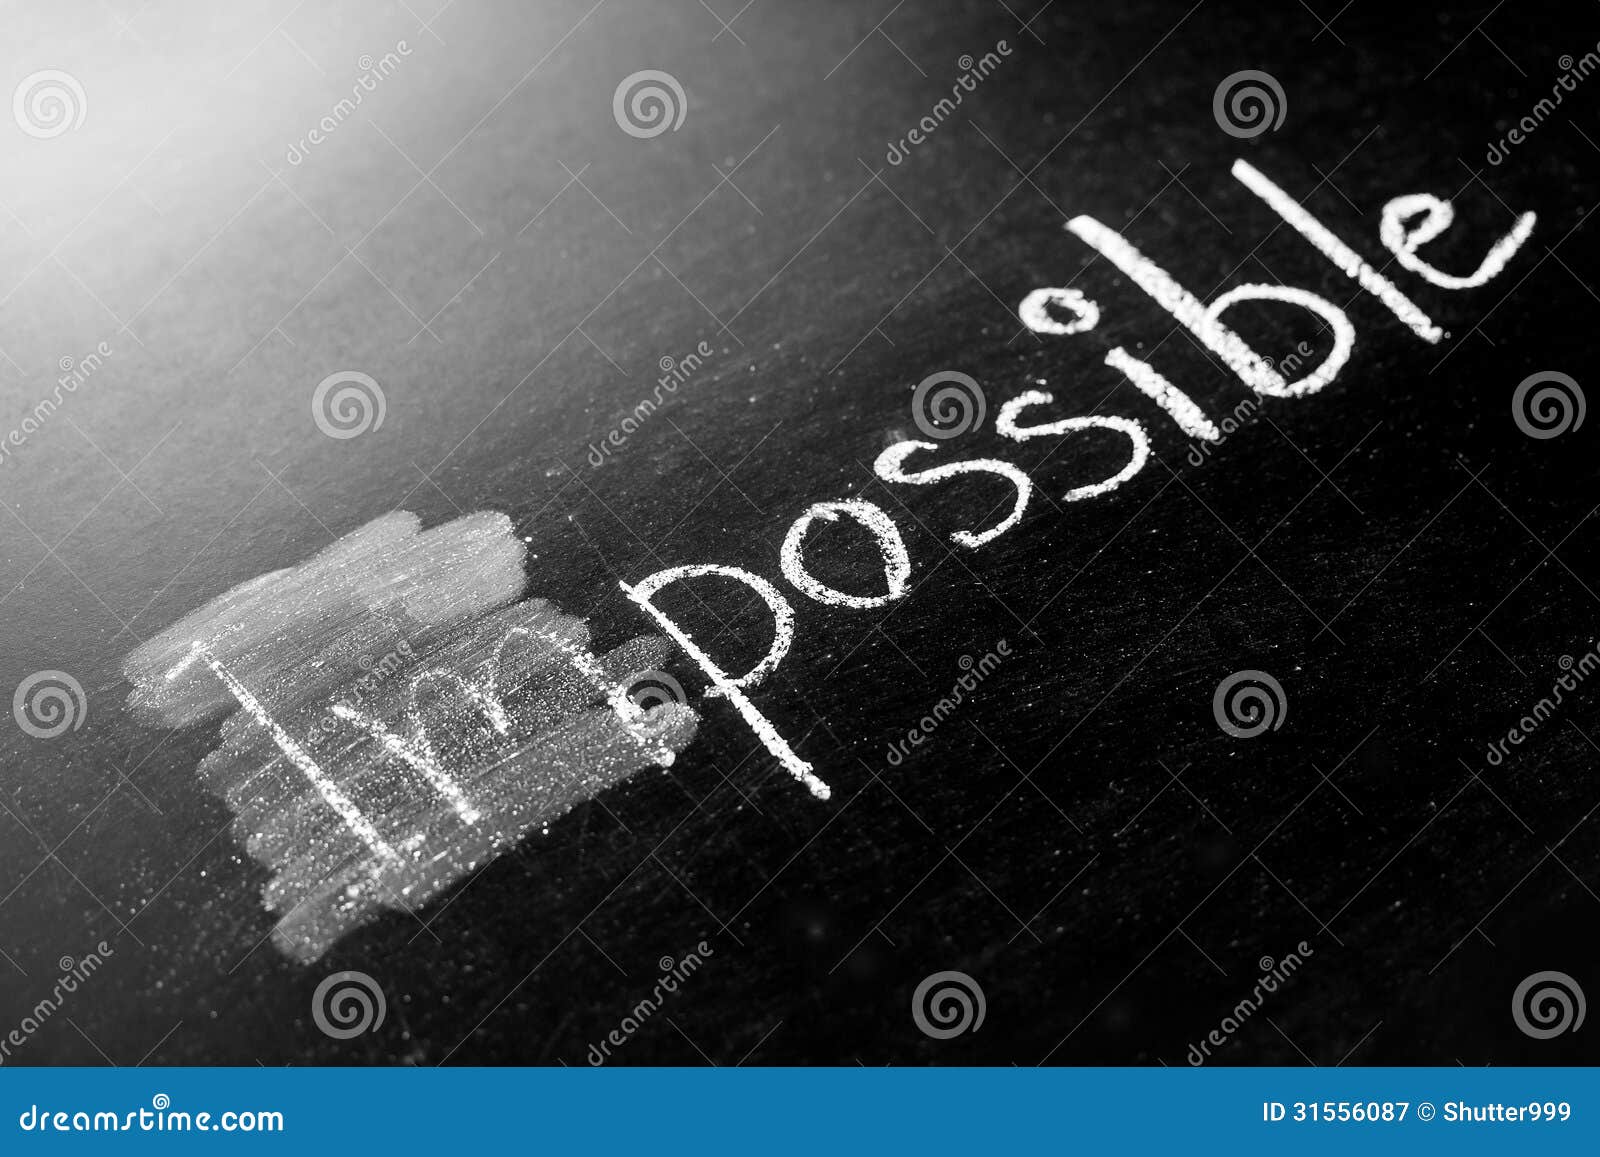 changing impossible into possible on a chalkboard